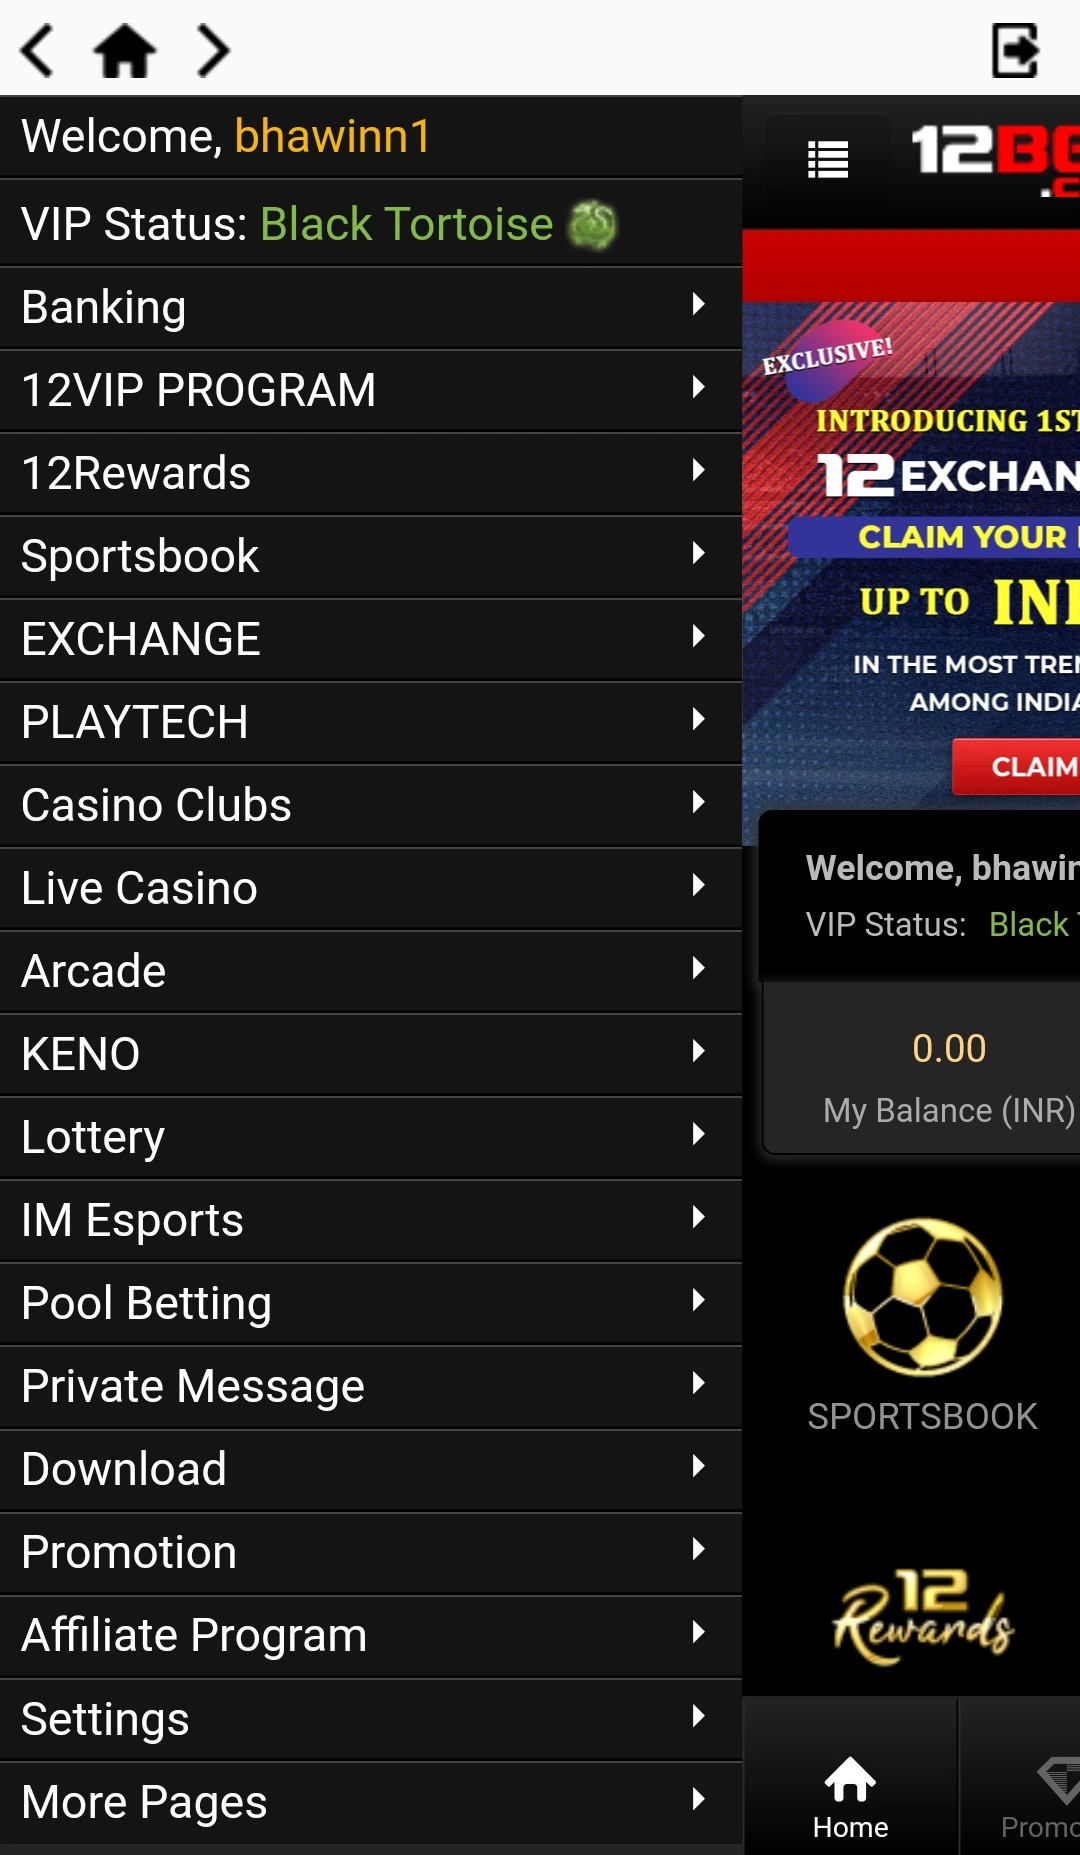 Menu and user navigation in the 12Bet app